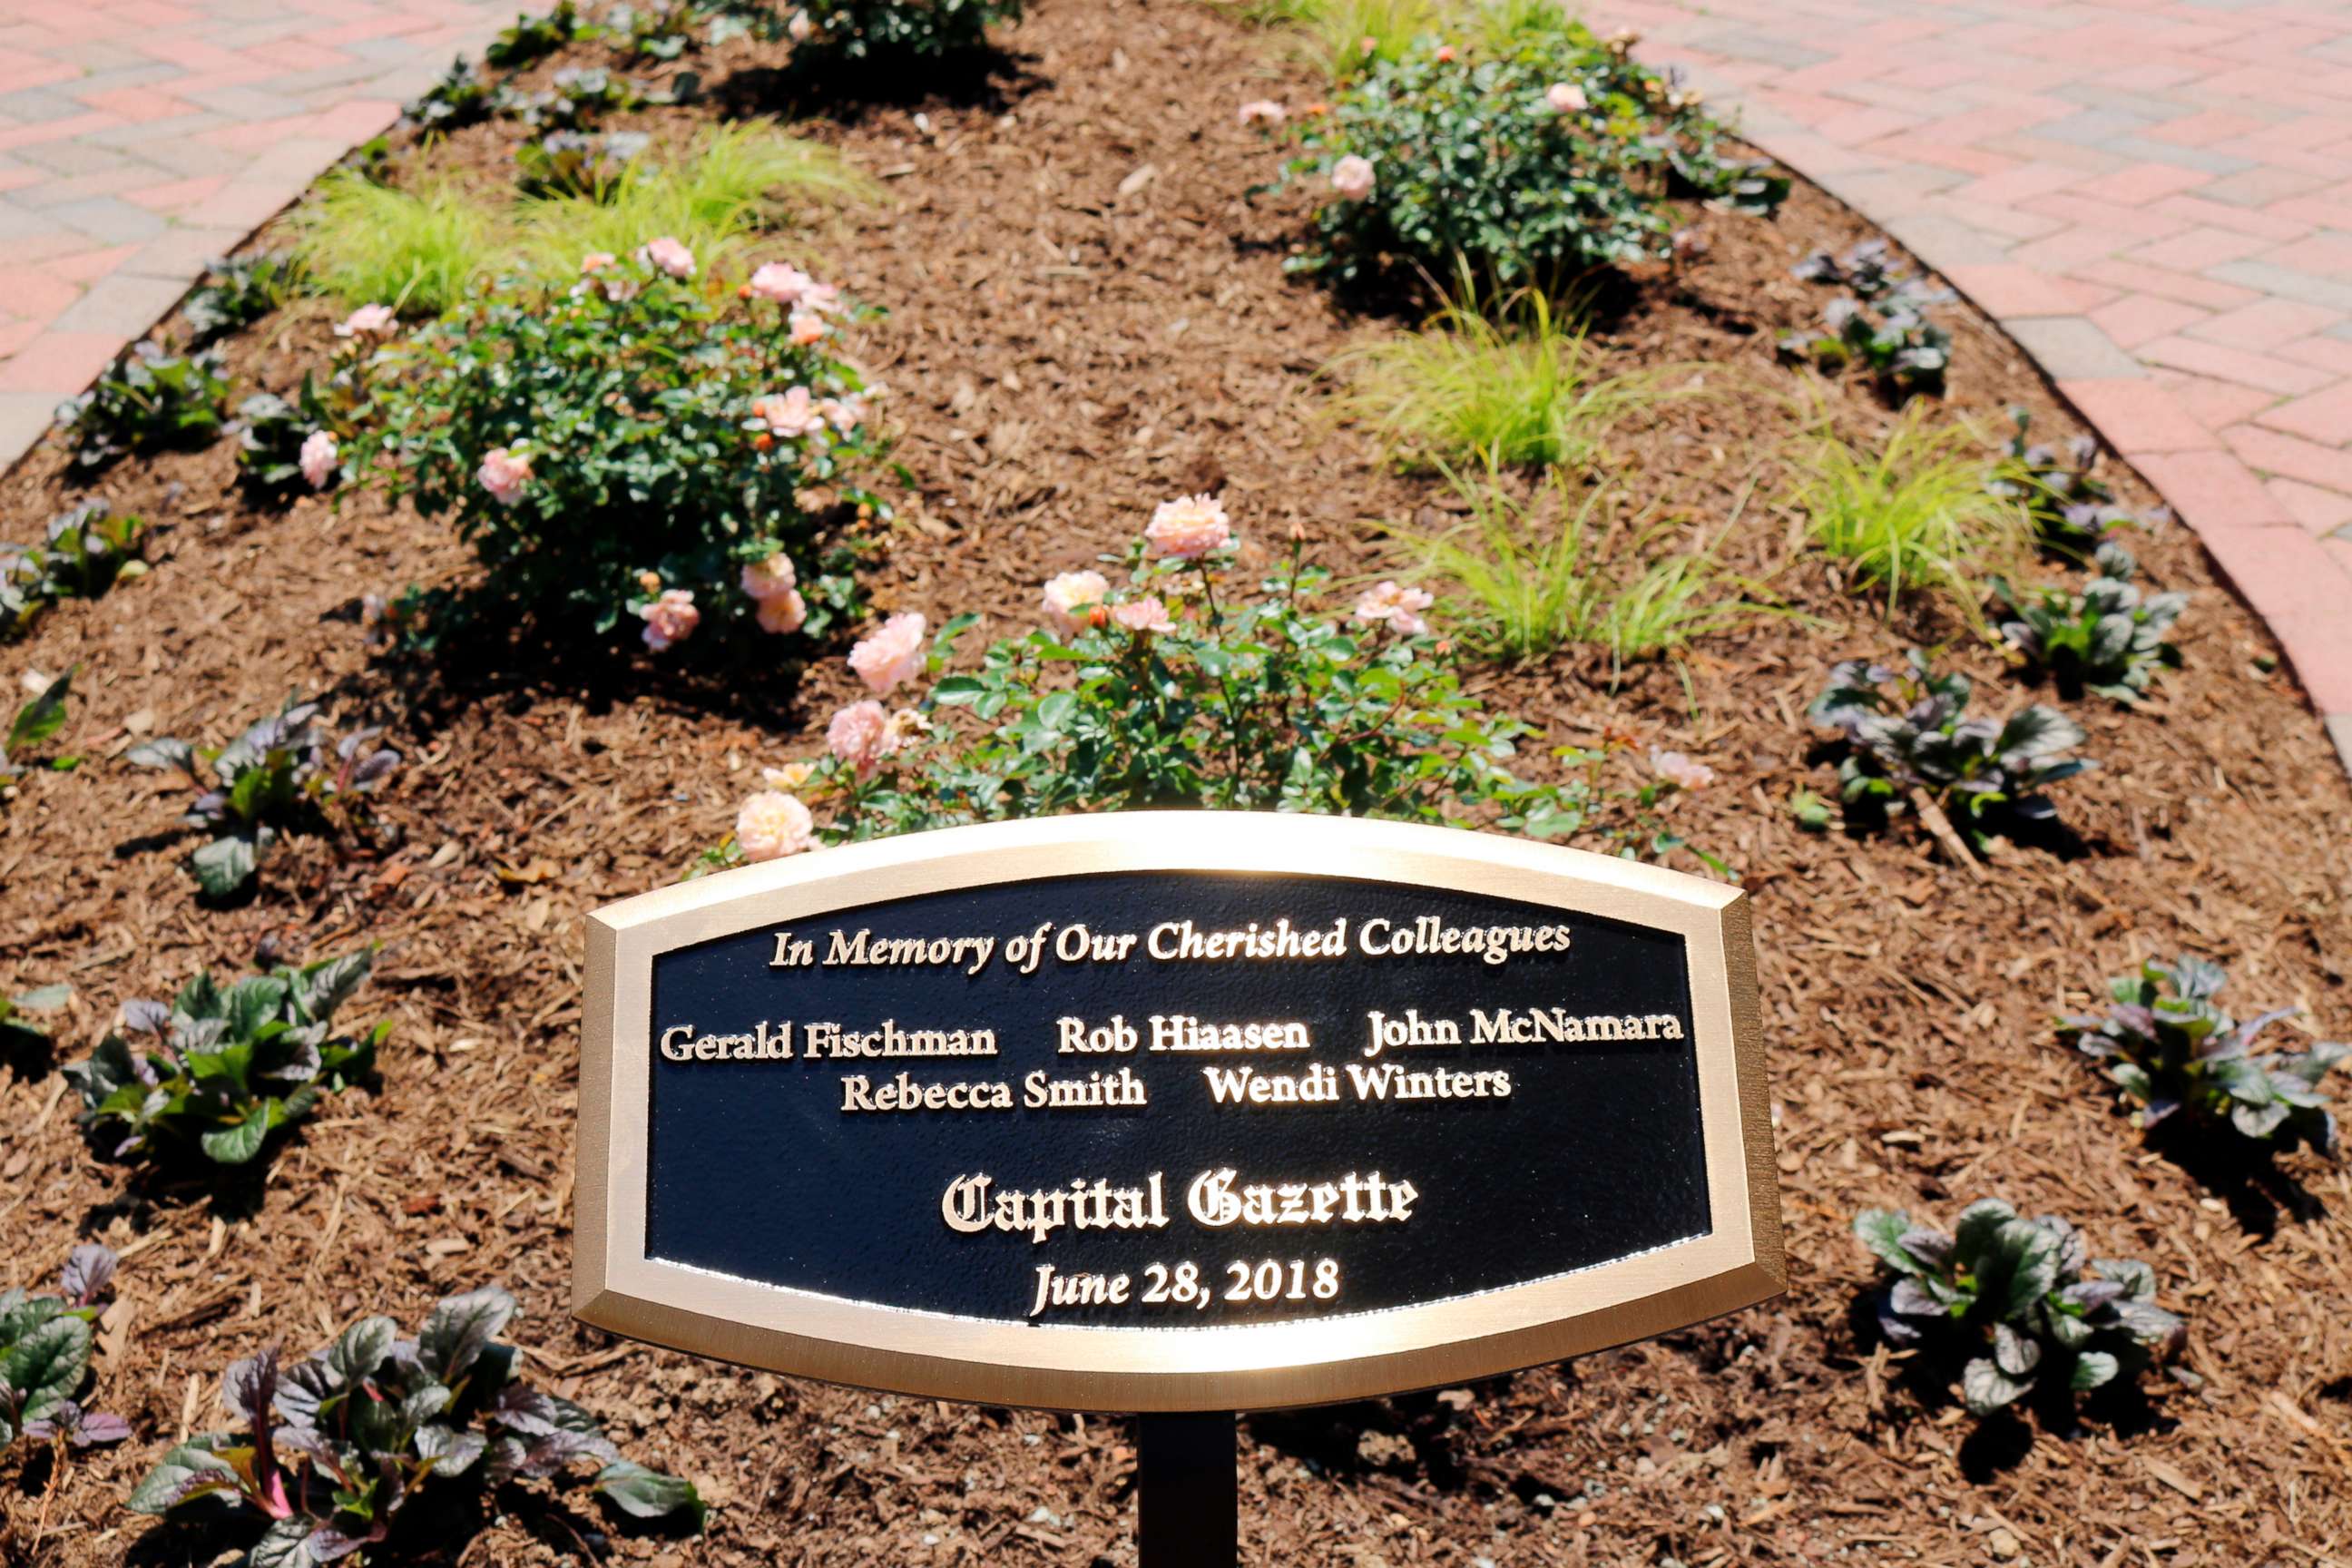 PHOTO: A memorial to the five Capital Gazette employees, who died in a shooting in the newspaper's newsroom last year, was unveiled Friday, June, 28, 2019, at a park in Annapolis, Md.